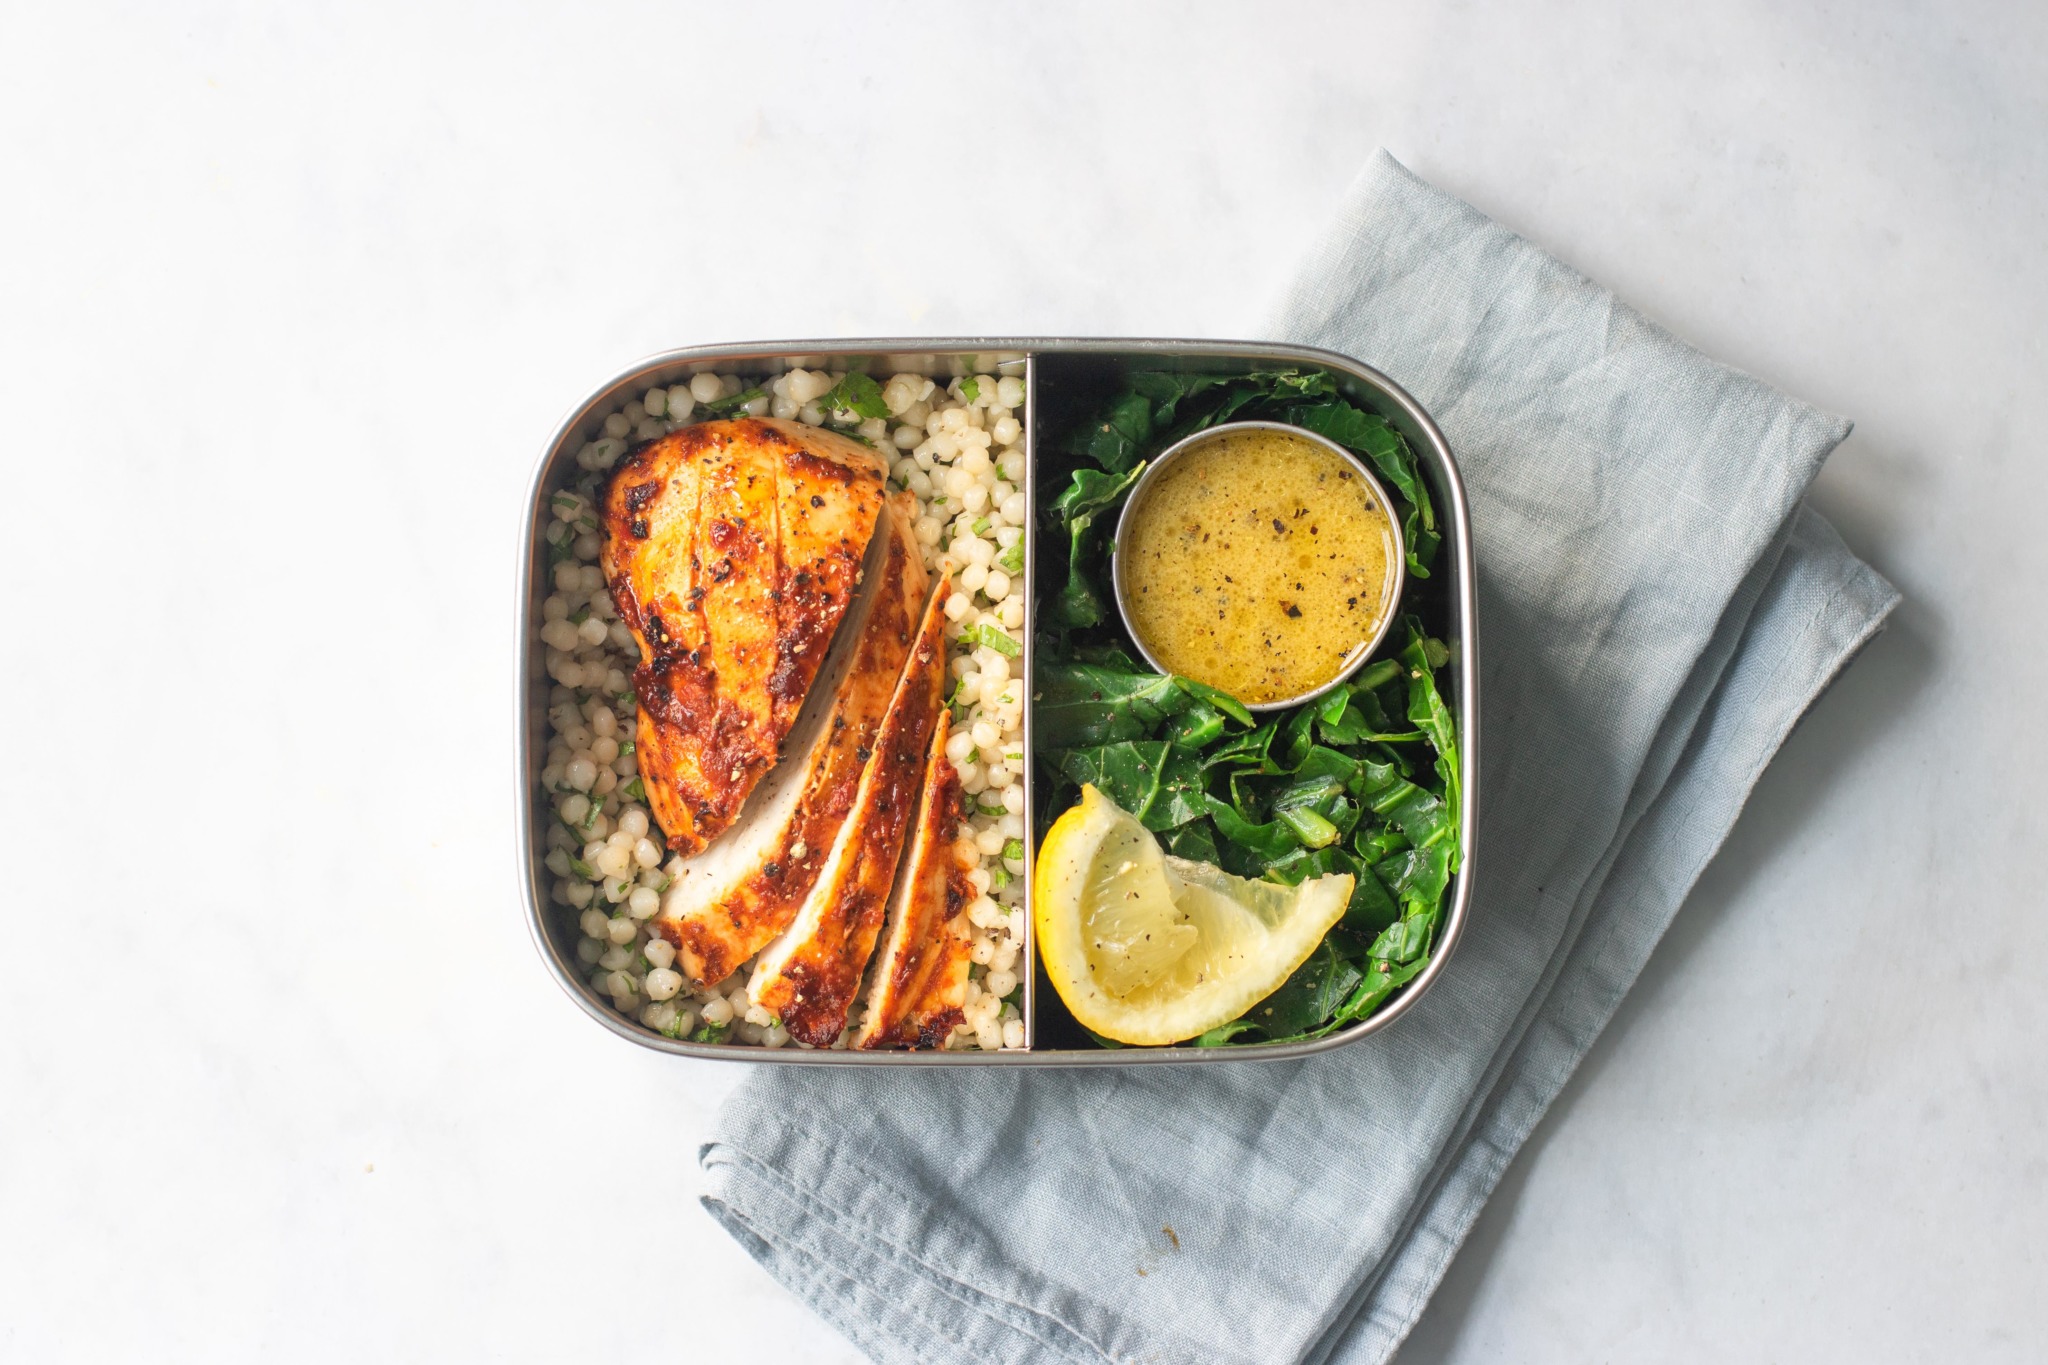 Morrocan Harissa Chicken With Wholewheat Couscous And Seasonal Greens